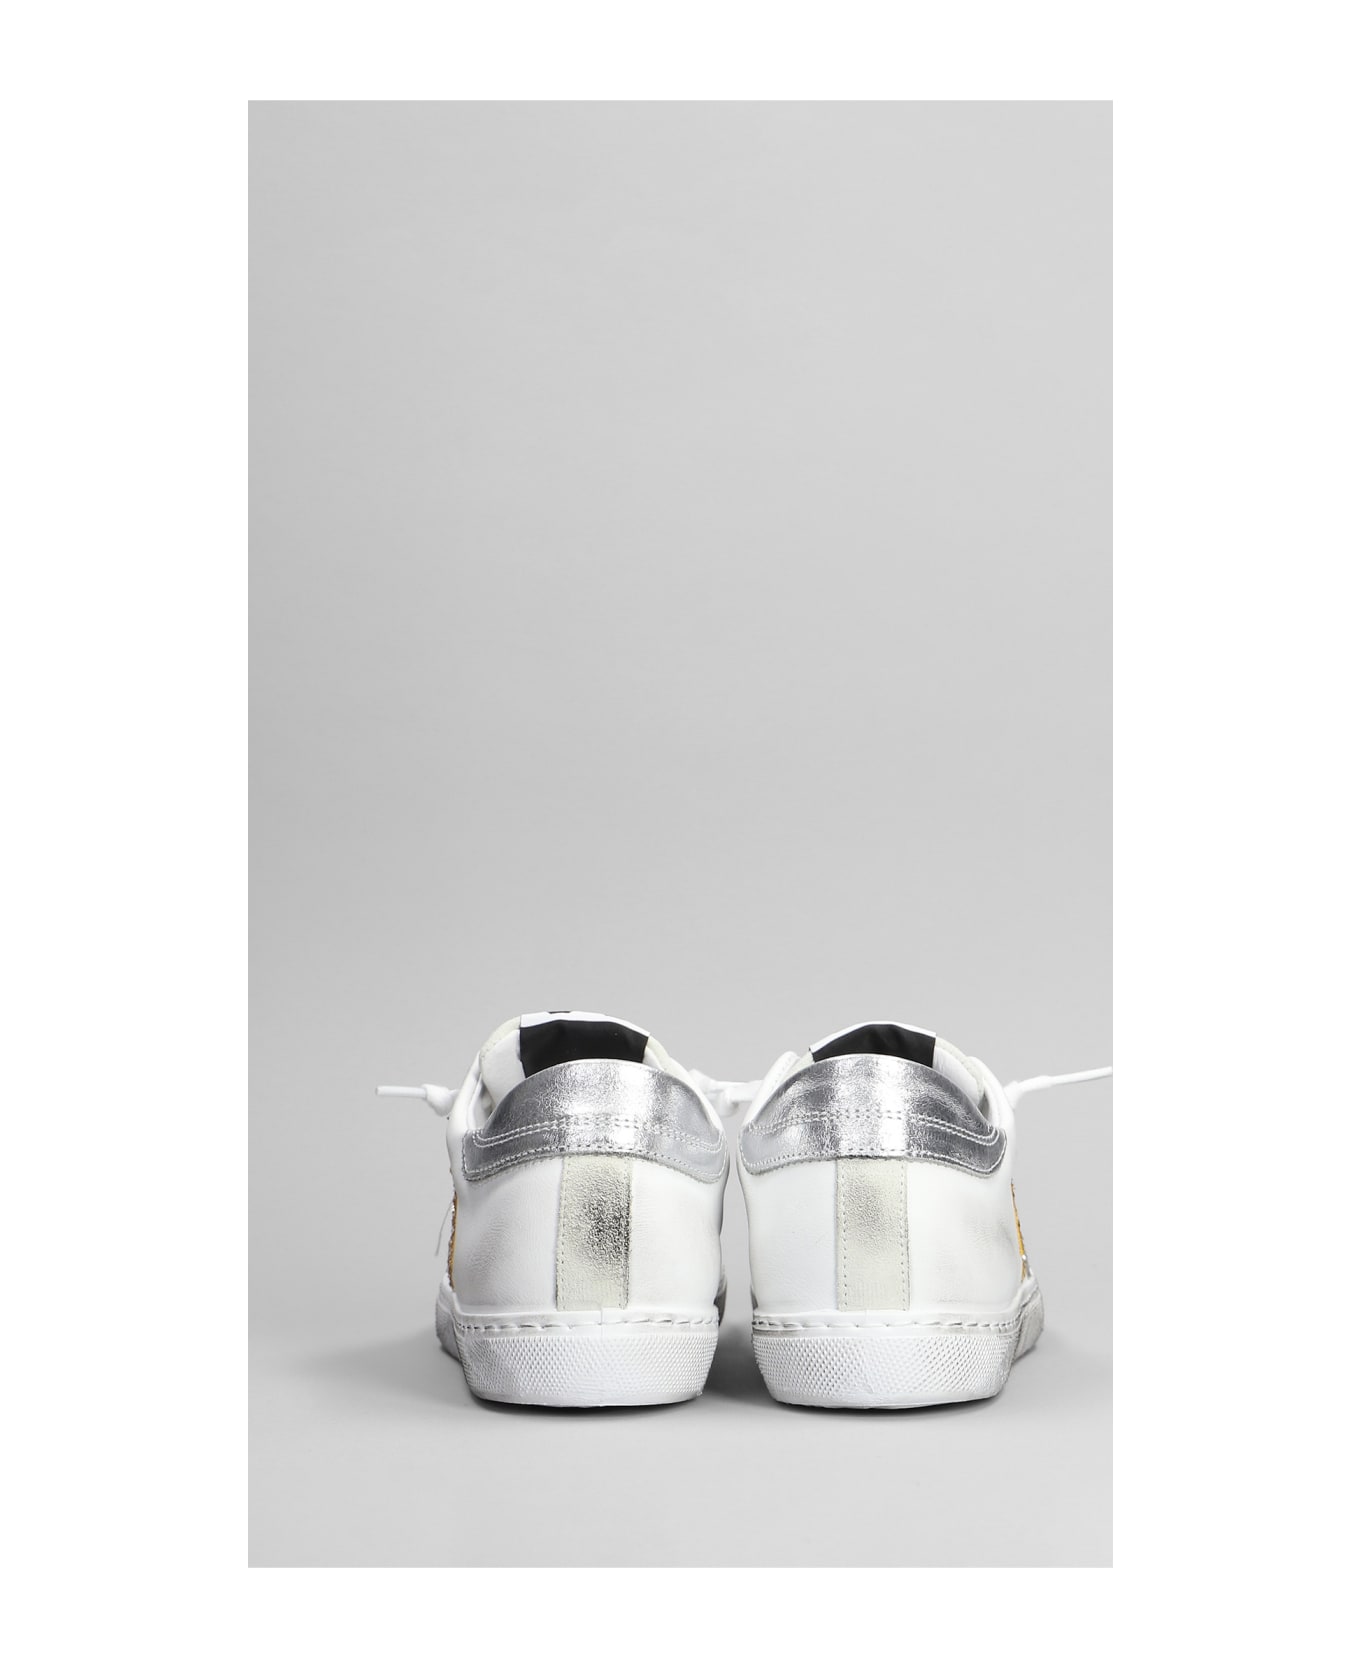 2Star One Star Sneakers In White Leather - white スニーカー